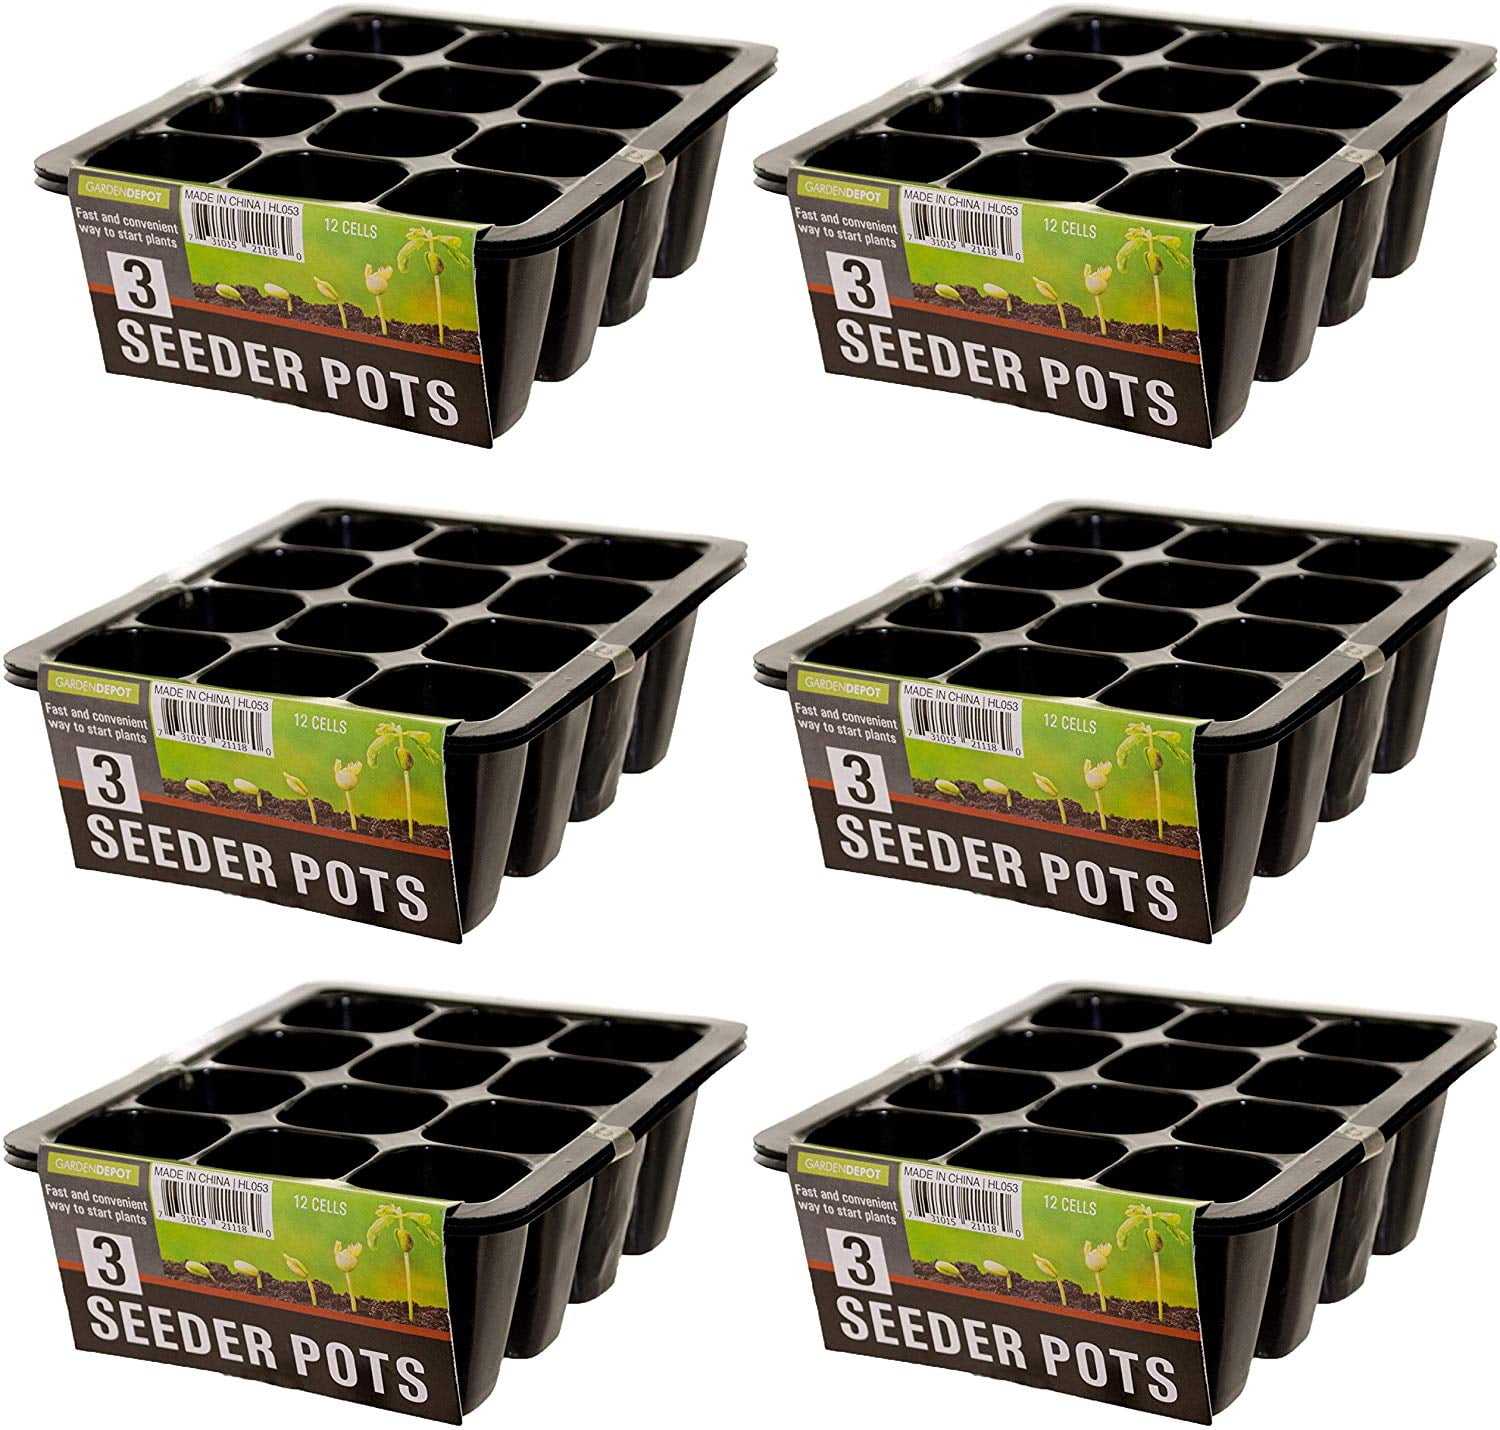 12/24 Cell Seedling Starter Tray Seed Germination Plants Propagation 3/10Pcs Set 